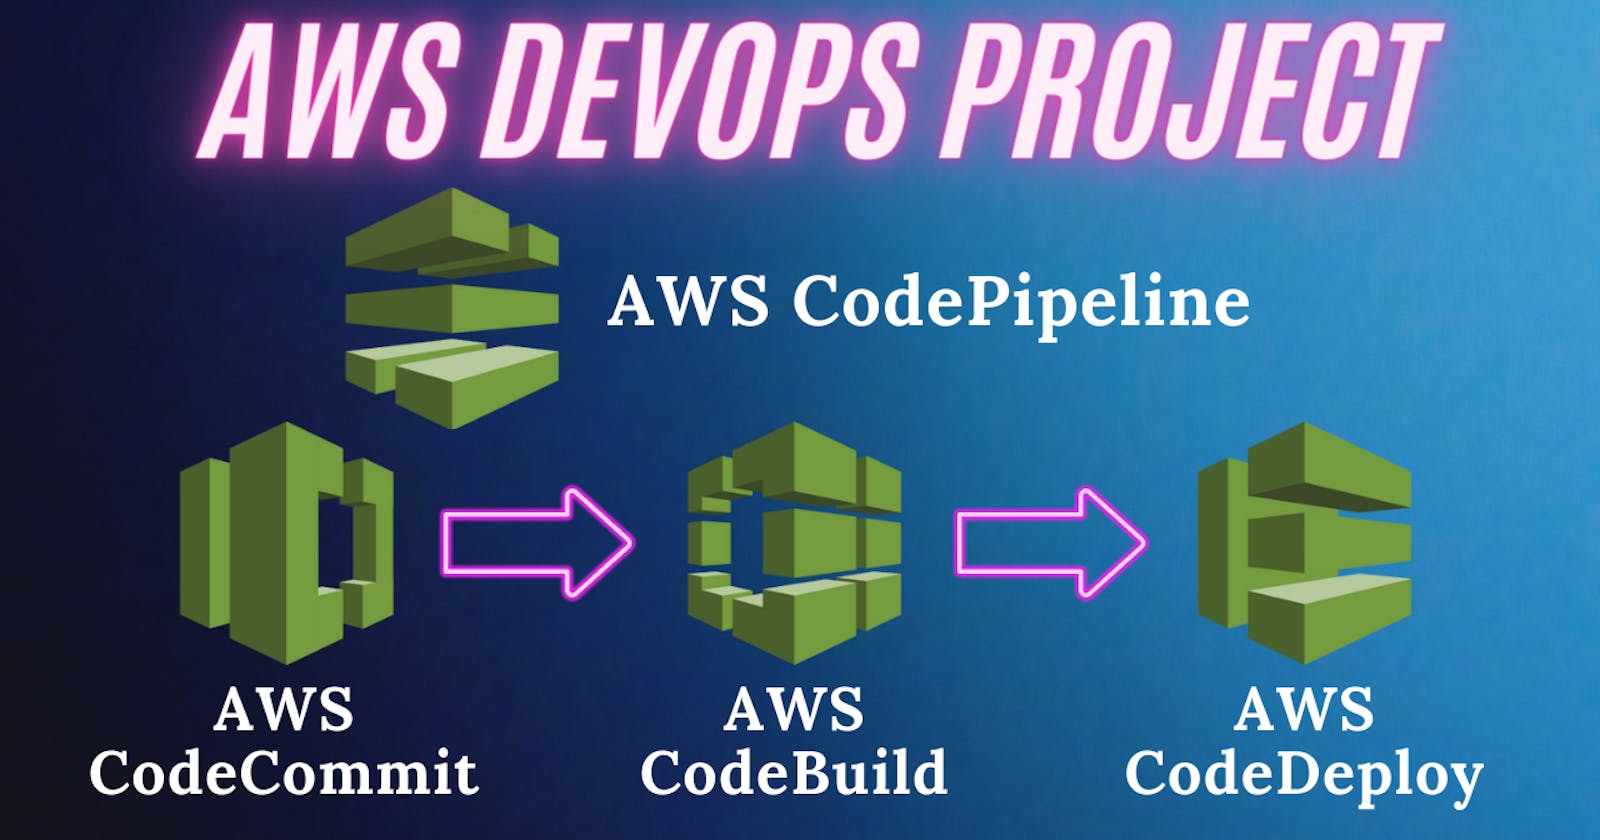 "💡Build, Deploy, Automate💡 Mastering AWS DevOps with CodeCommit, CodeBuild, CodeDeploy & CodePipeline"